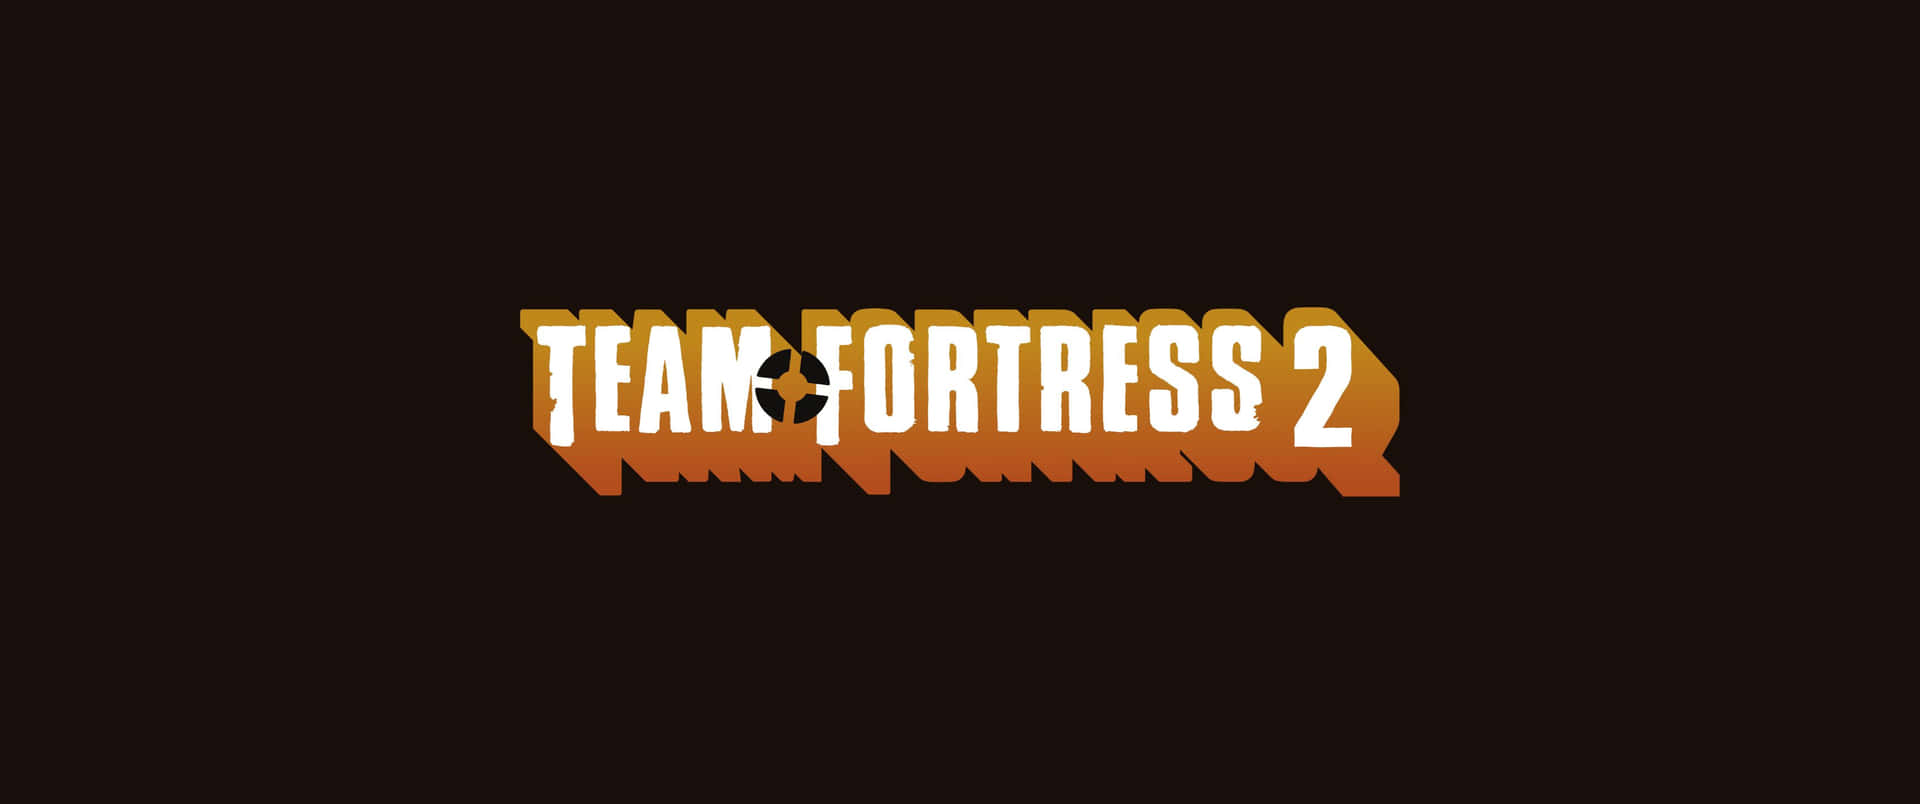 An Open Battlefield Awaits in this 3440x1440p Team Fortress 2 Background!